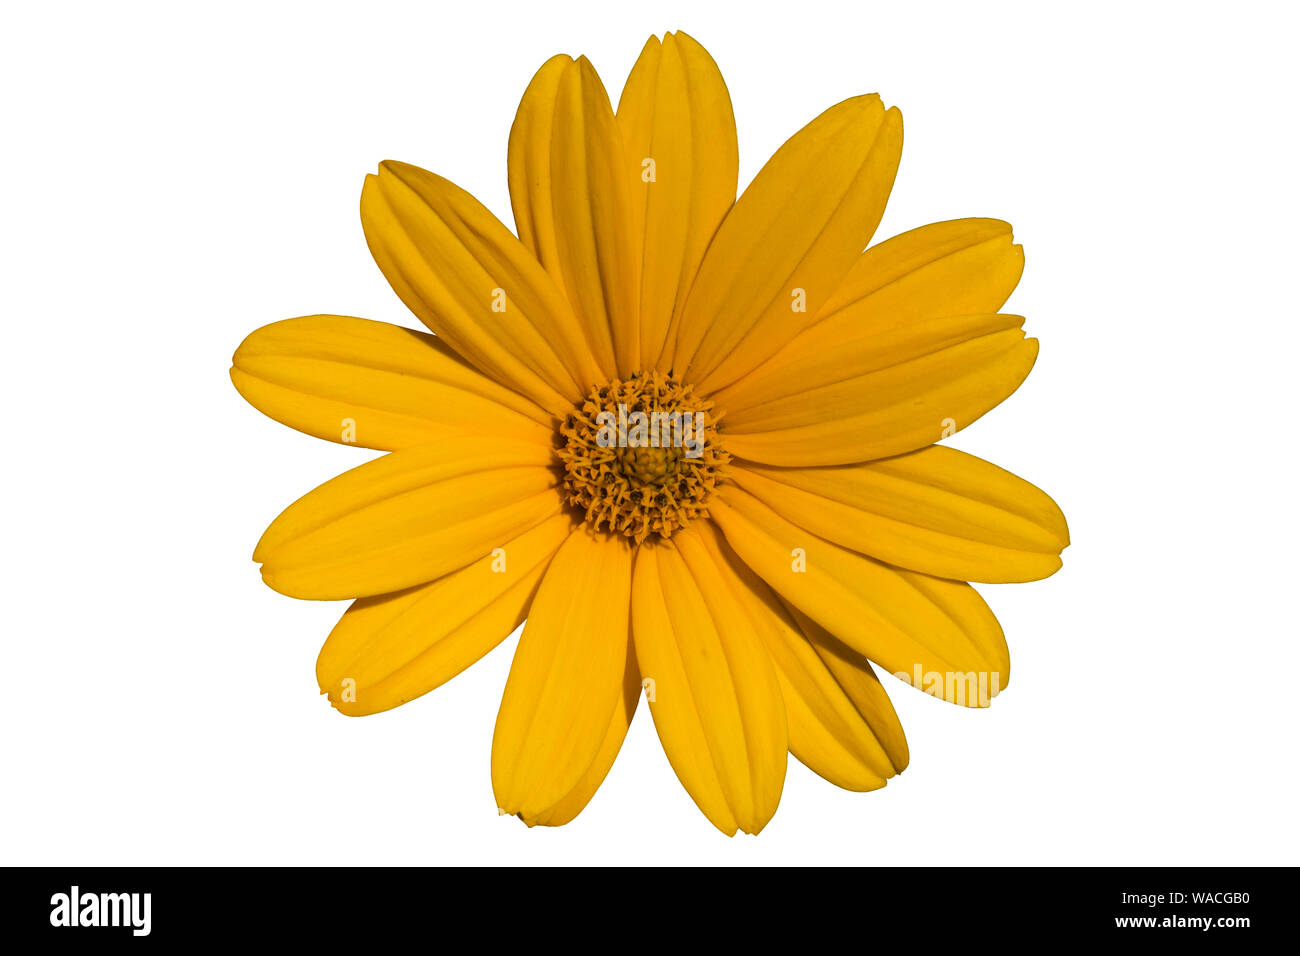 Heliopsis scabra 'Light of Loddon' yellow flower isolated on white. Stock Photo